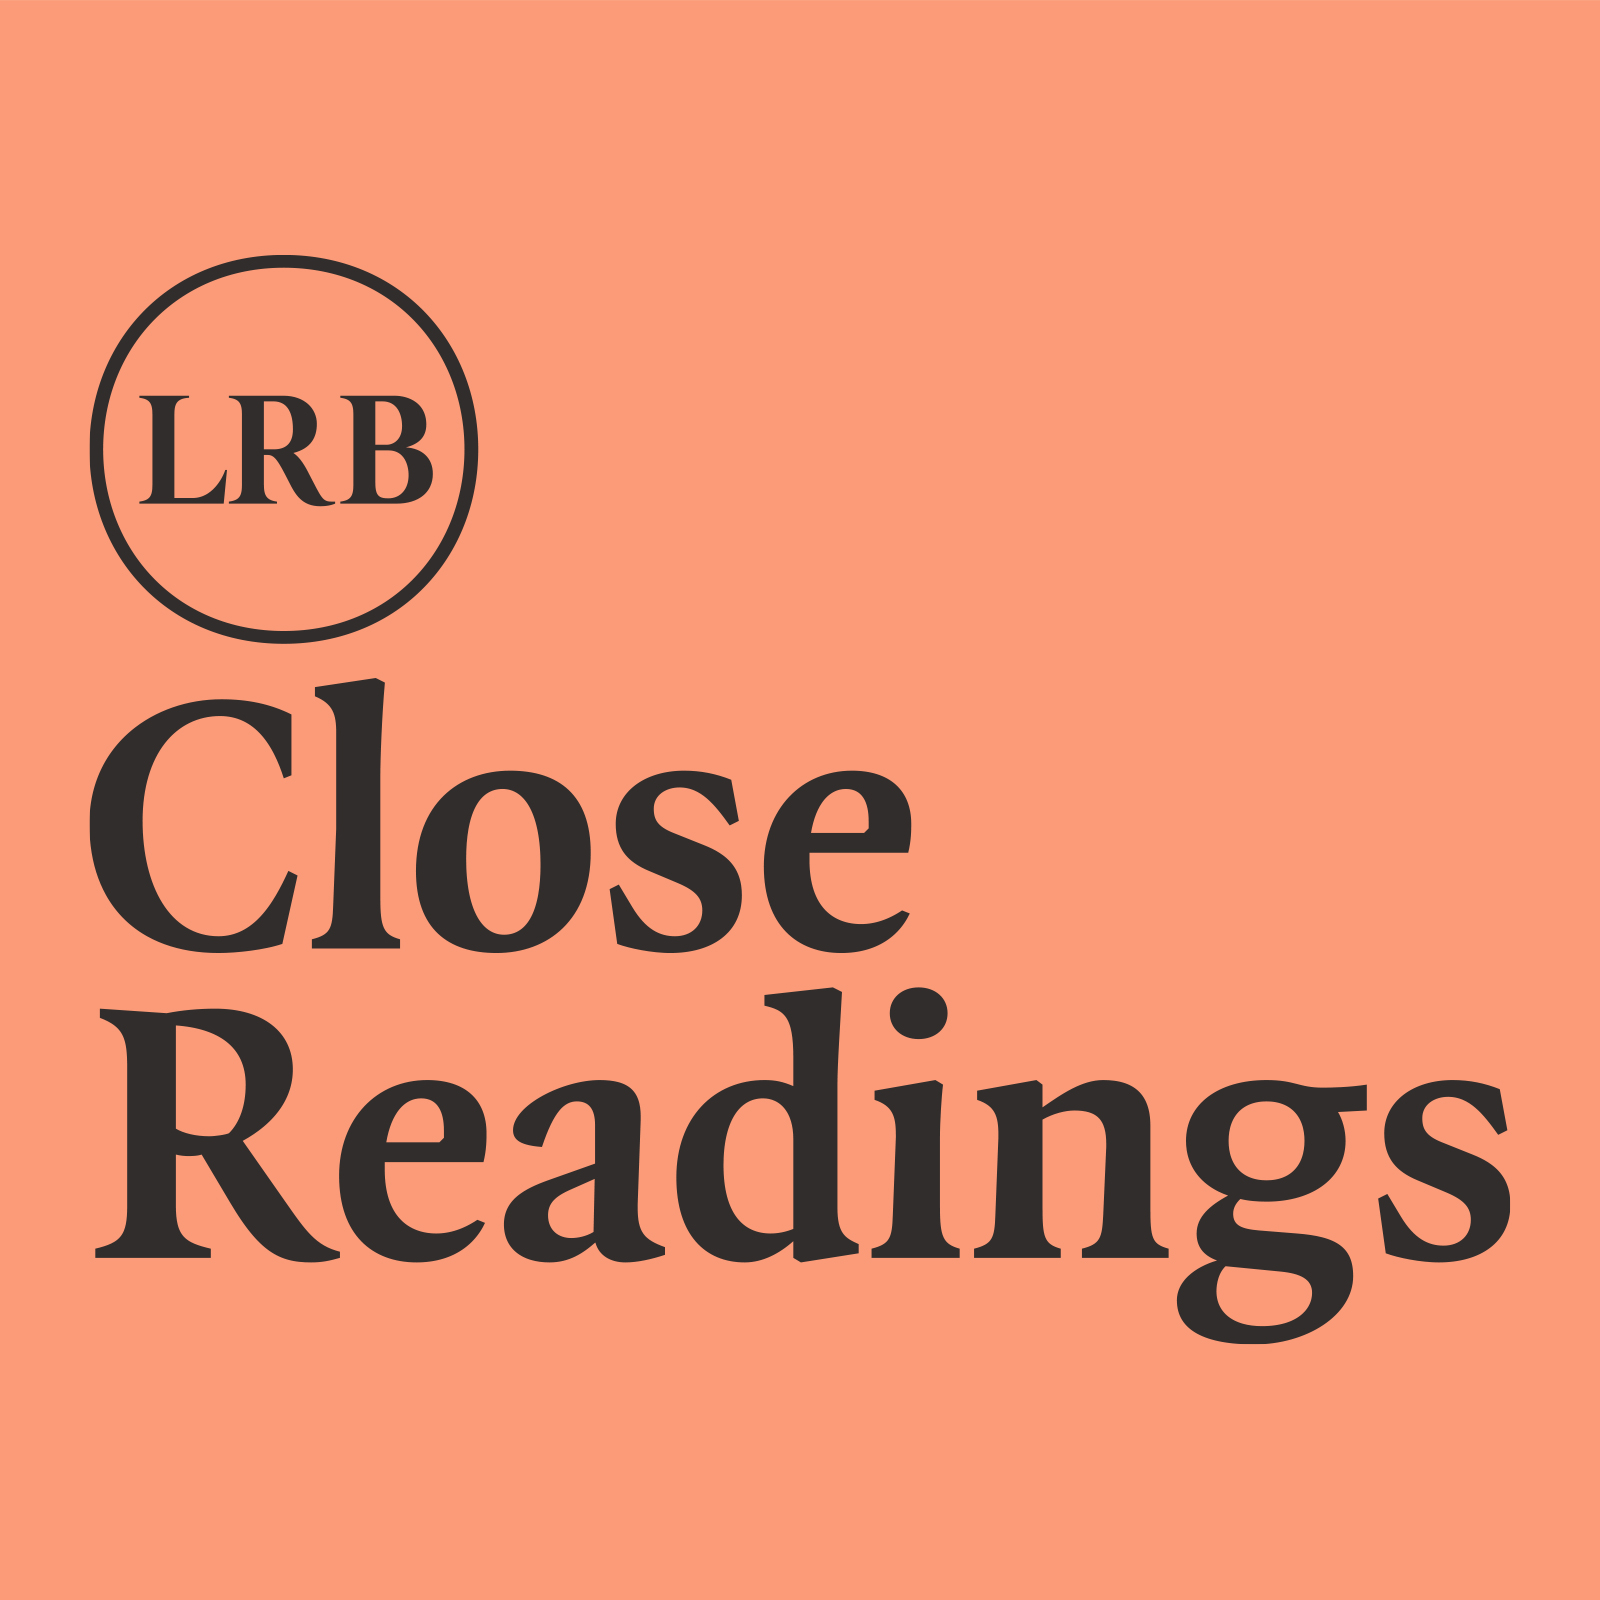 London Review of Books logo